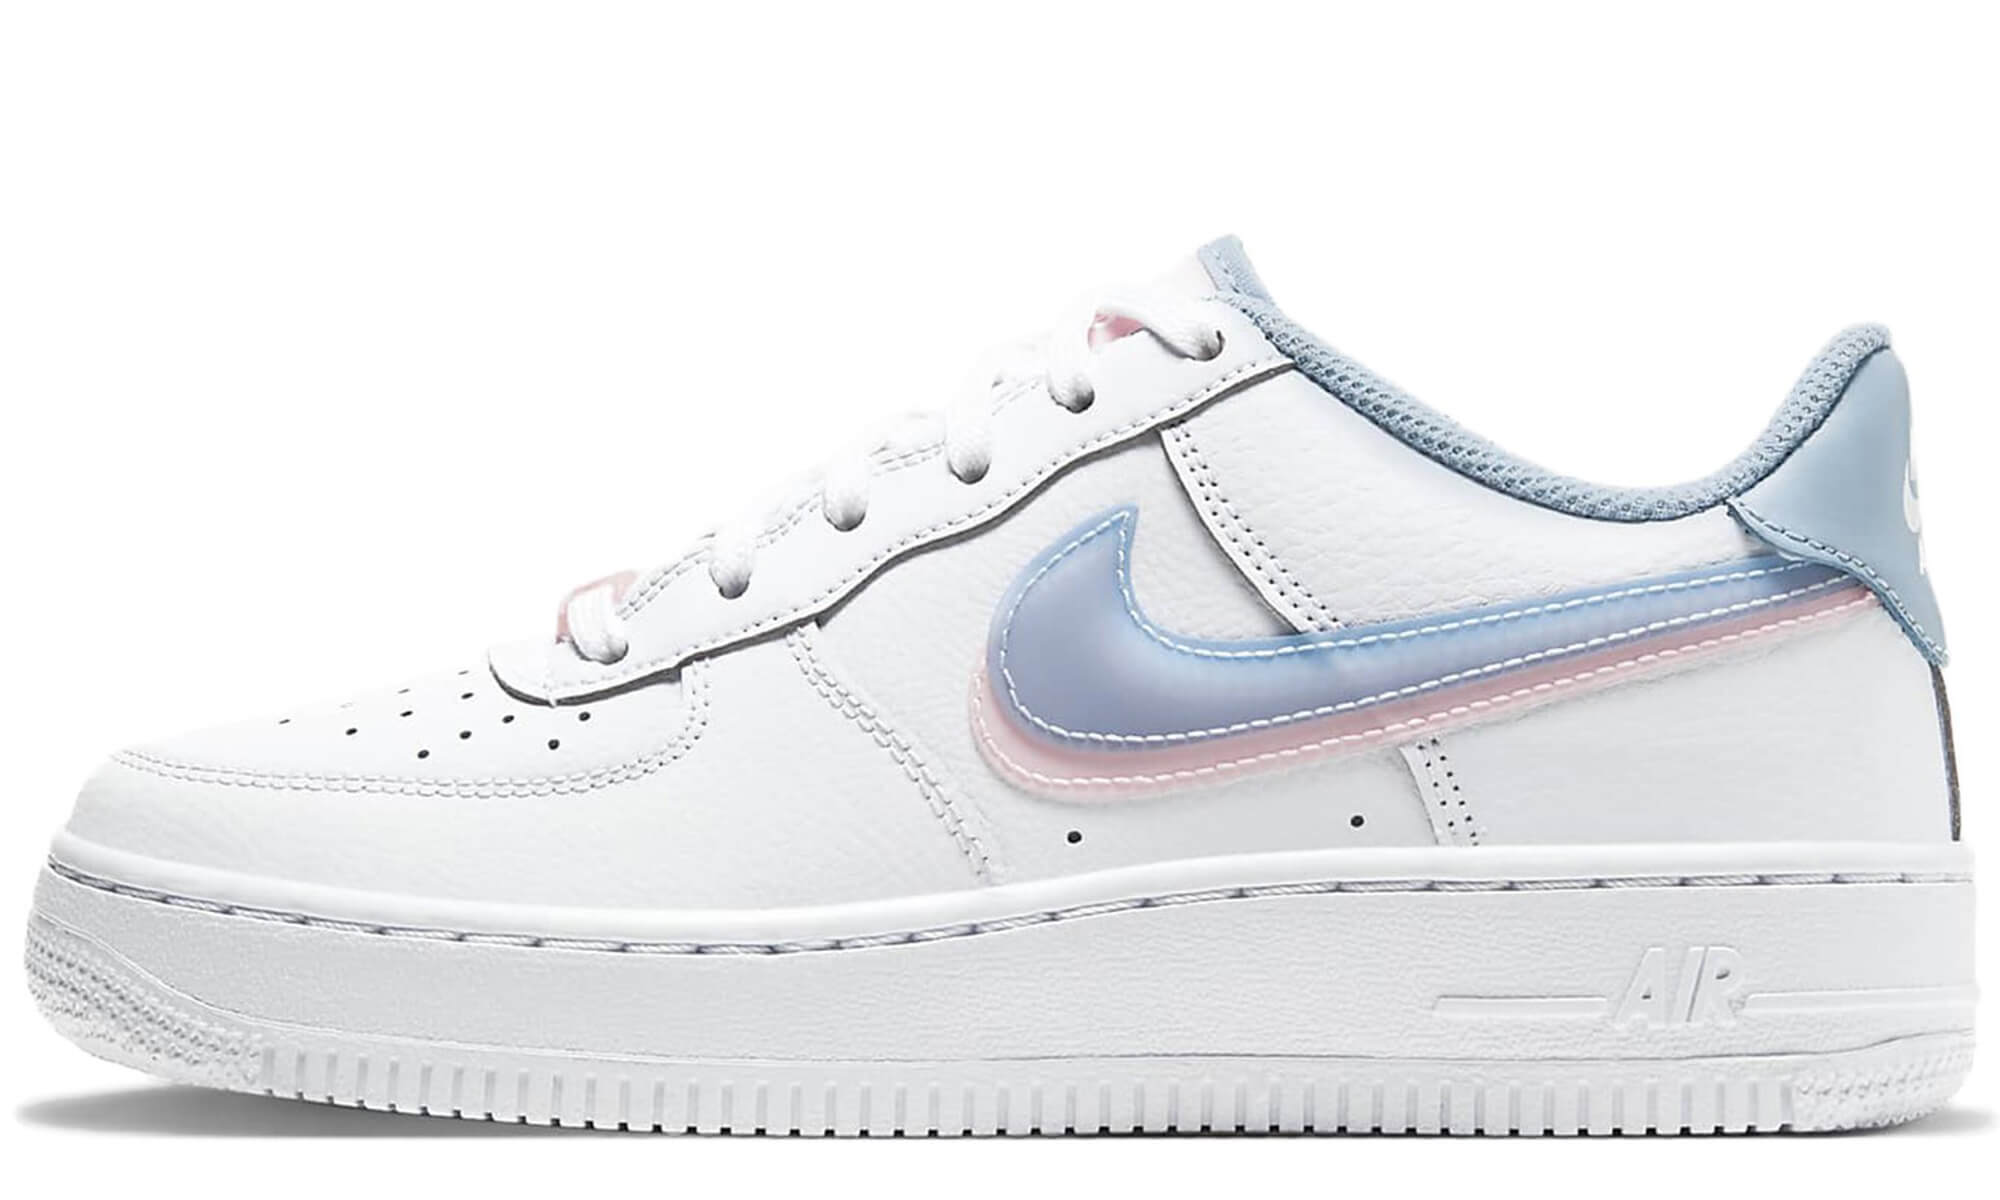 Nike Air Force 1 LV8 3 Wolf Grey (GS) for Women